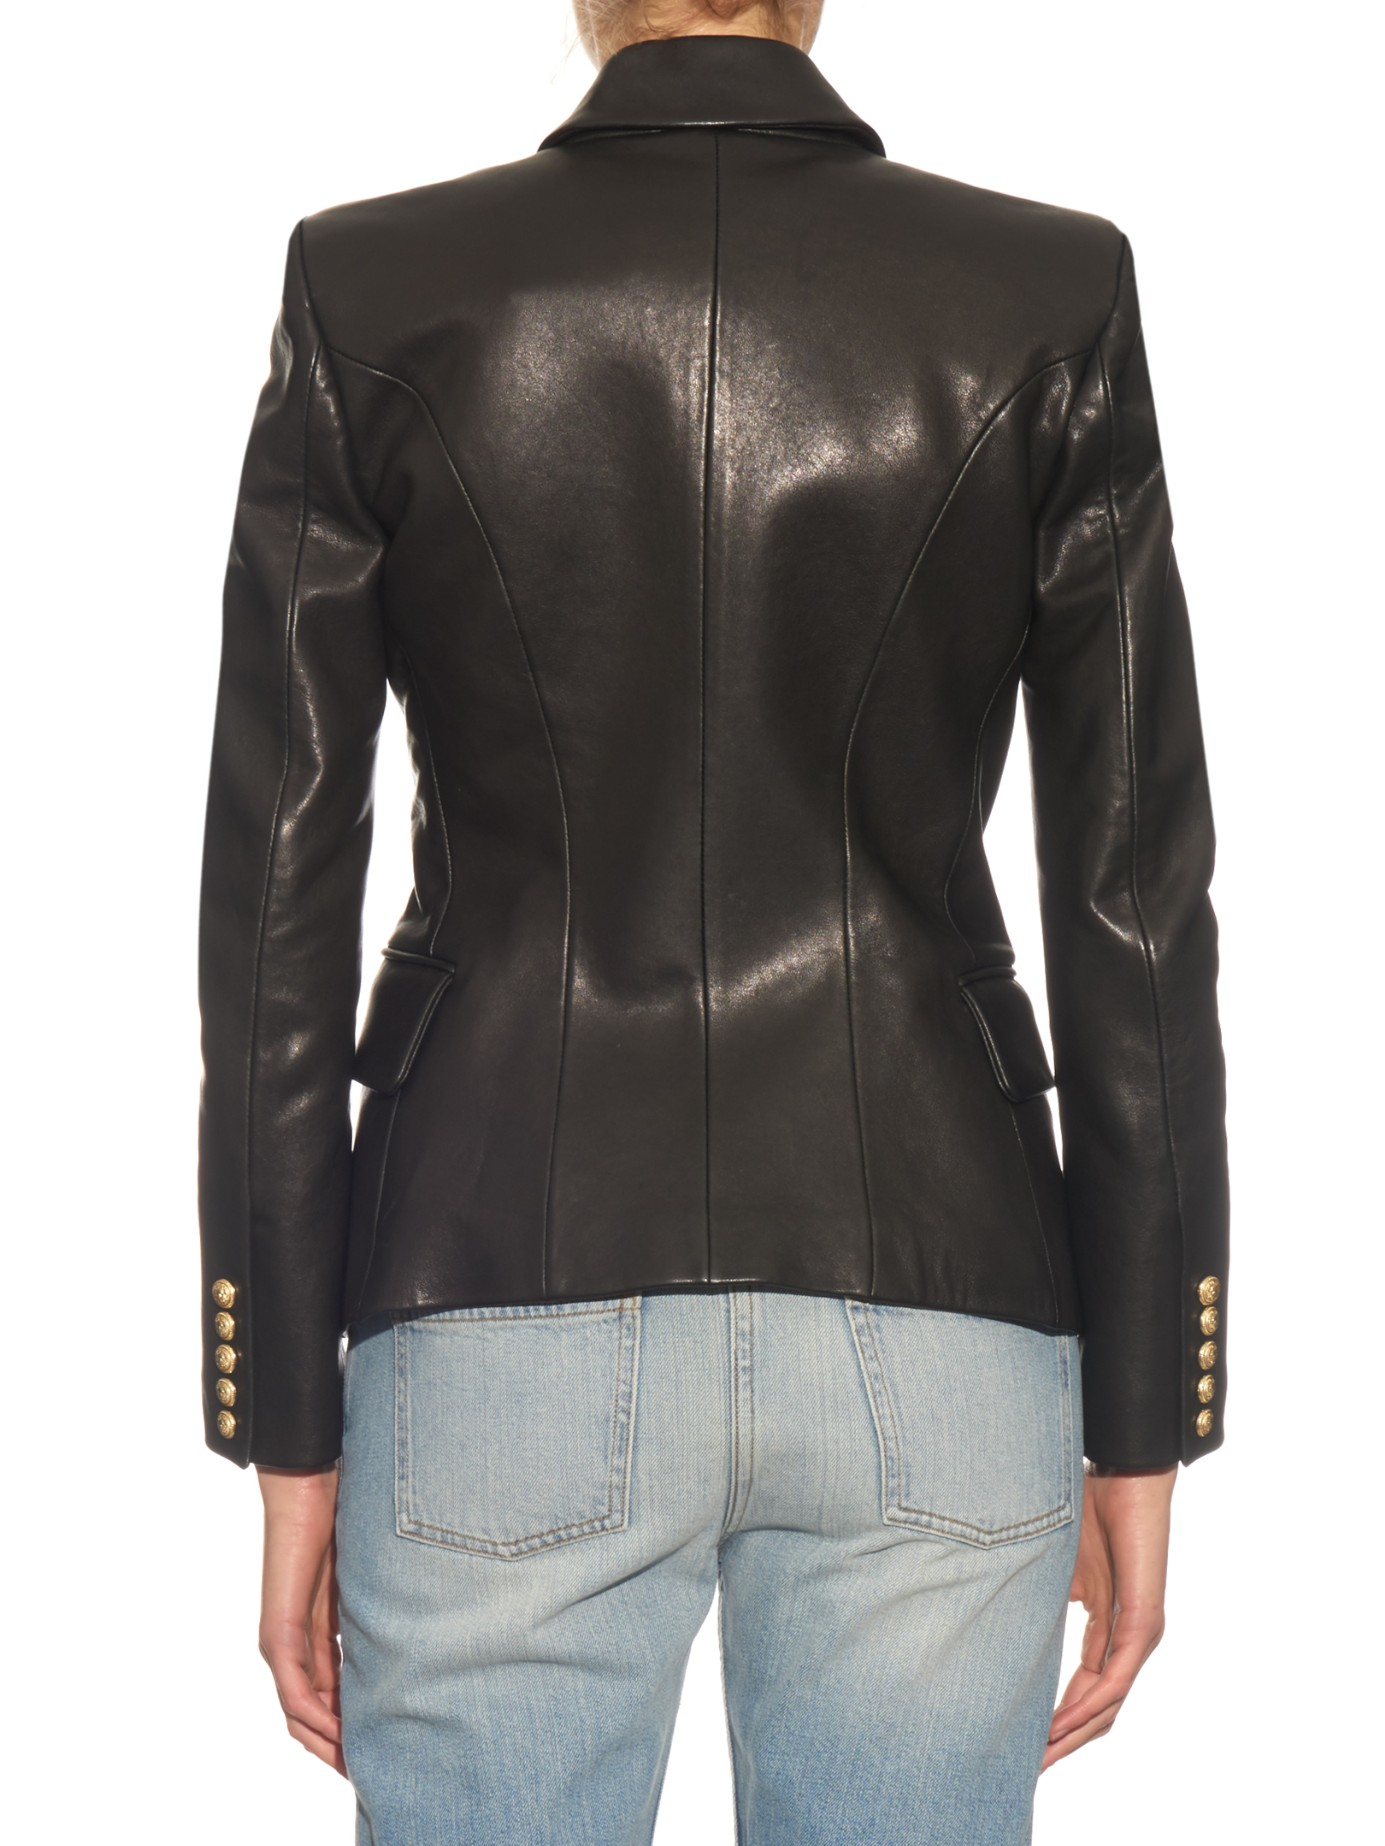 Balmain Double-Breasted Leather Jacket in Black - Lyst